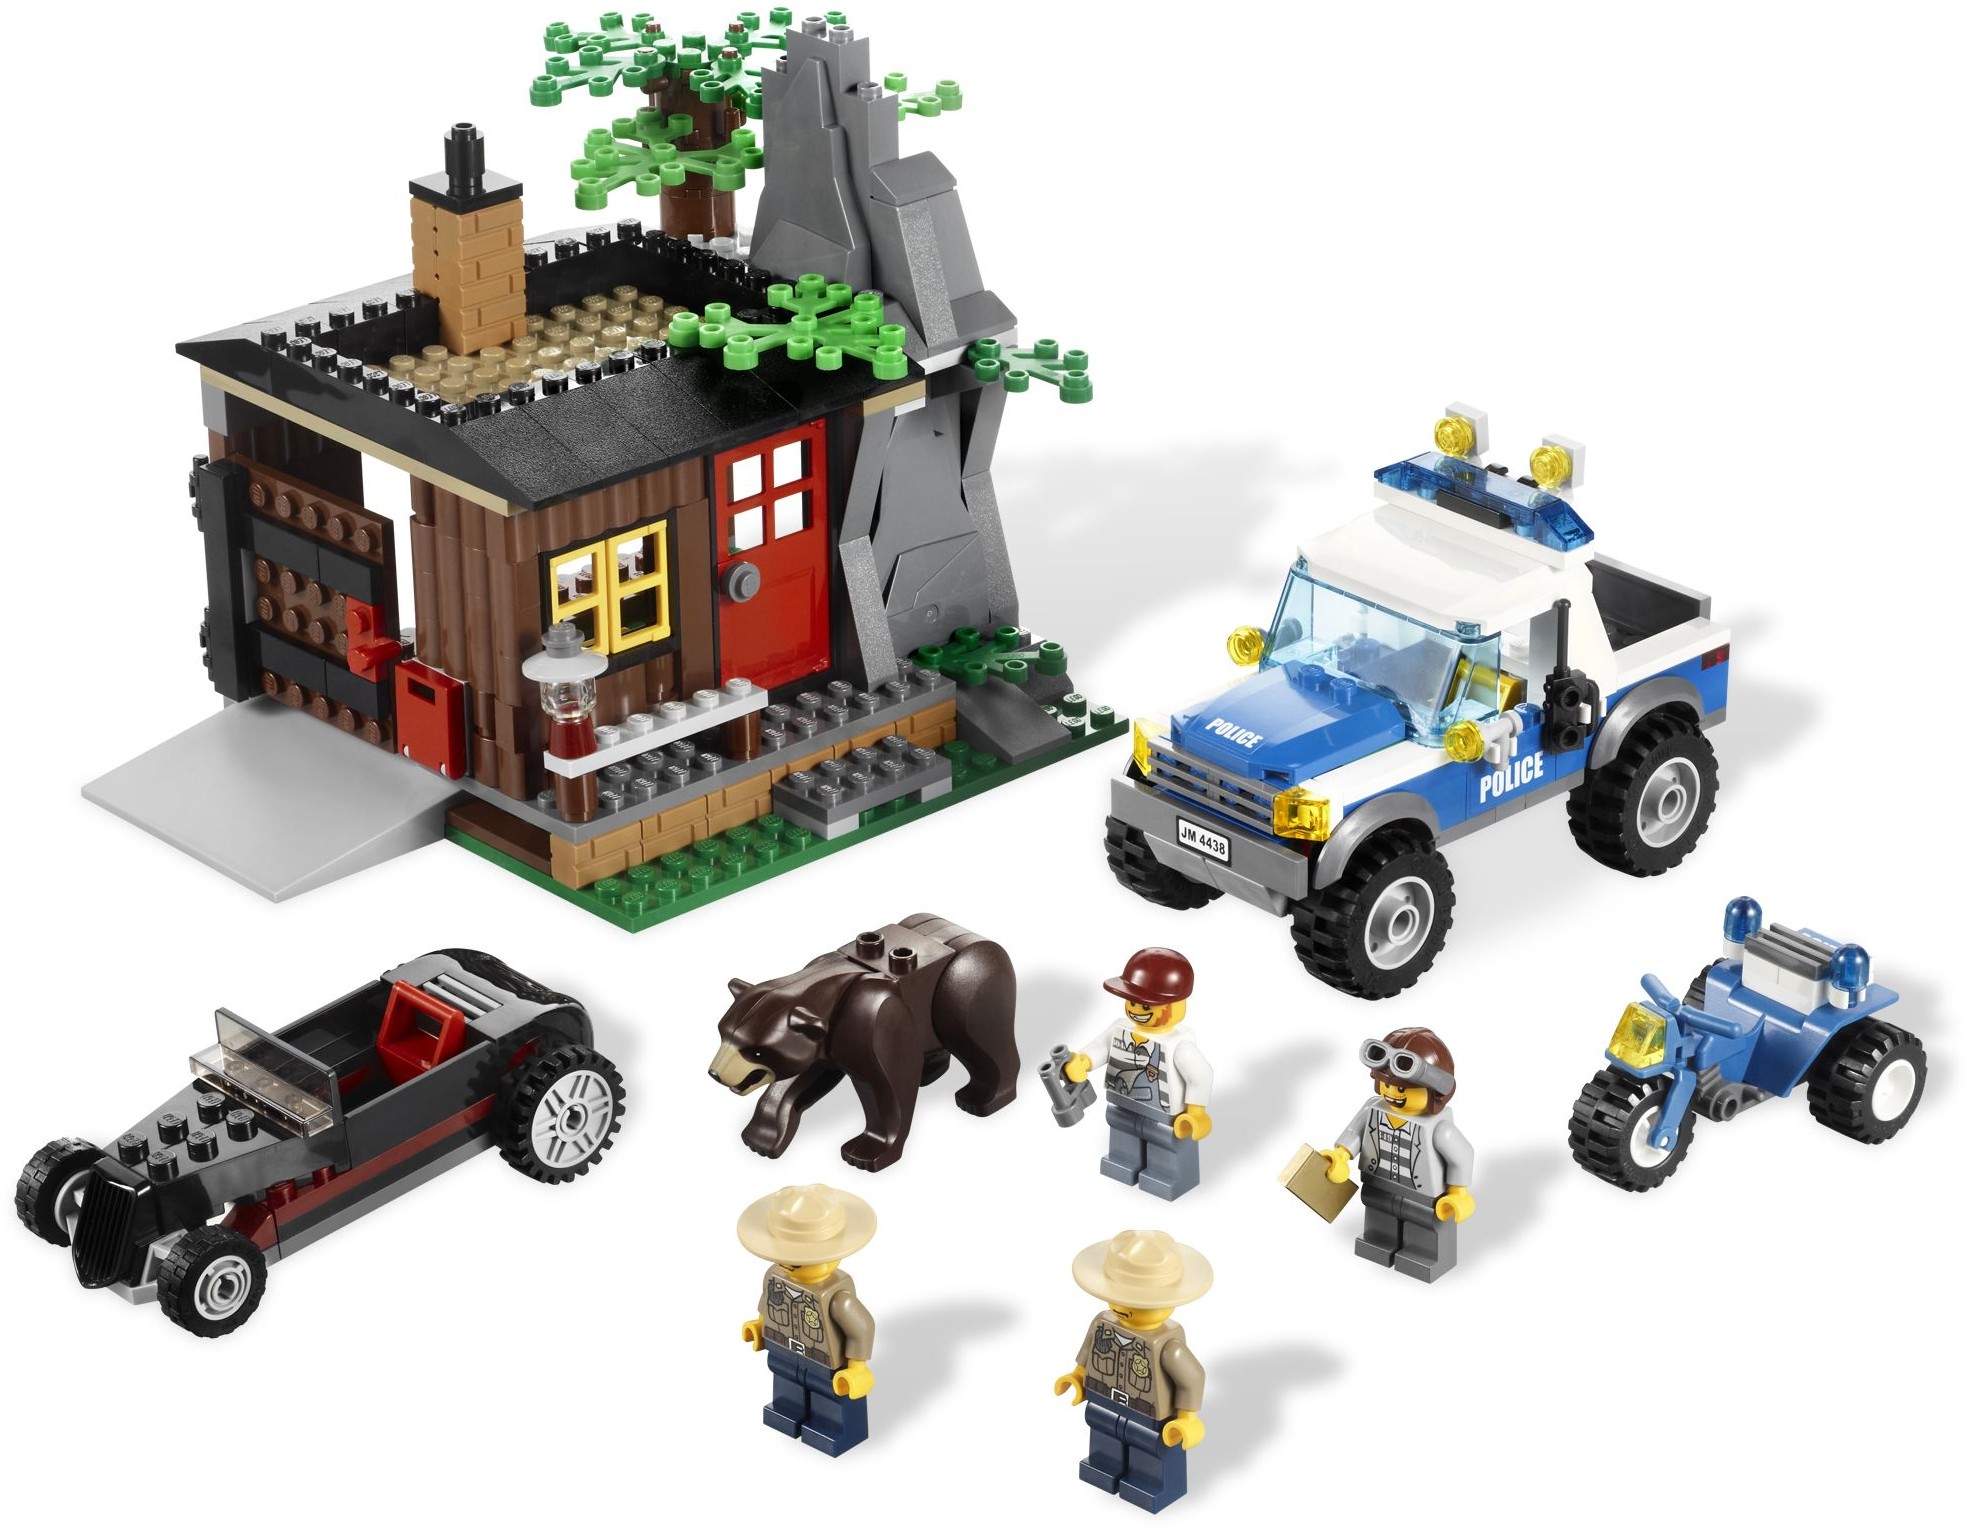 Lego-minifigures-police-forest police 4436 cty0260 